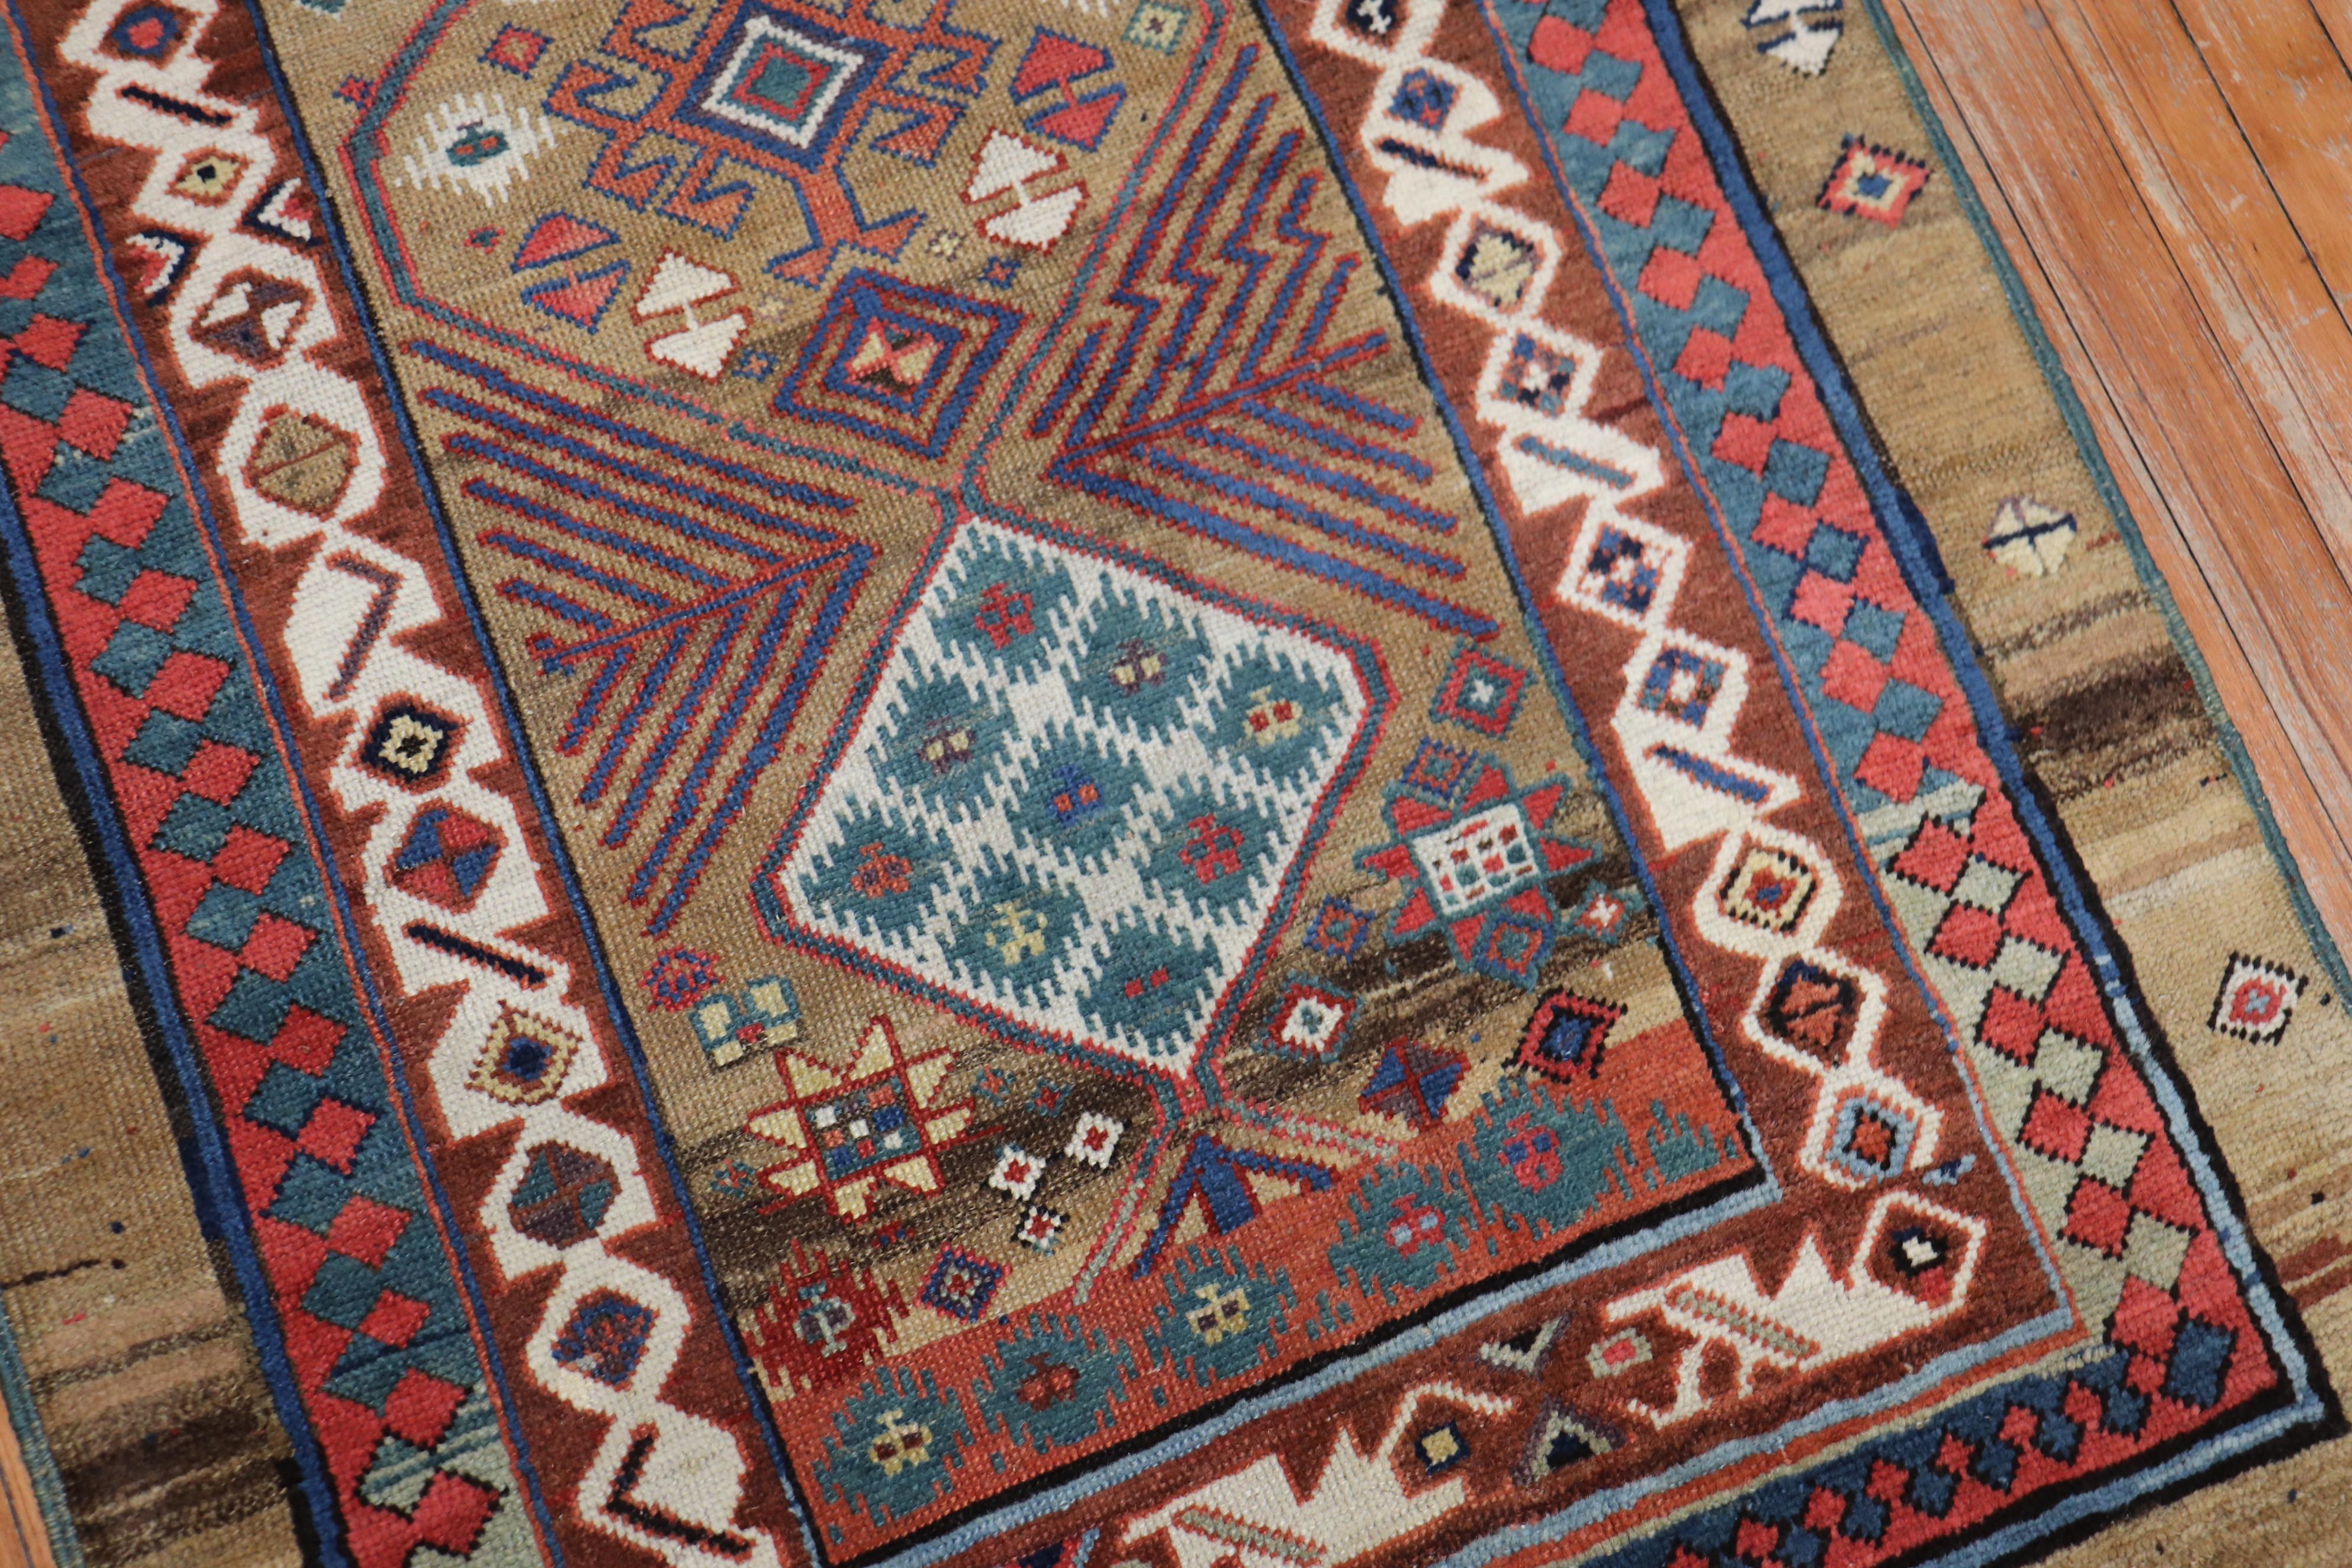 Highly collectible full pile Persian Serab runner with a camel ground and geometric motif. The colors, quality, geometry, and characteristics make this a true one of a kind unique gem, circa 1890.

Measures: 3'3